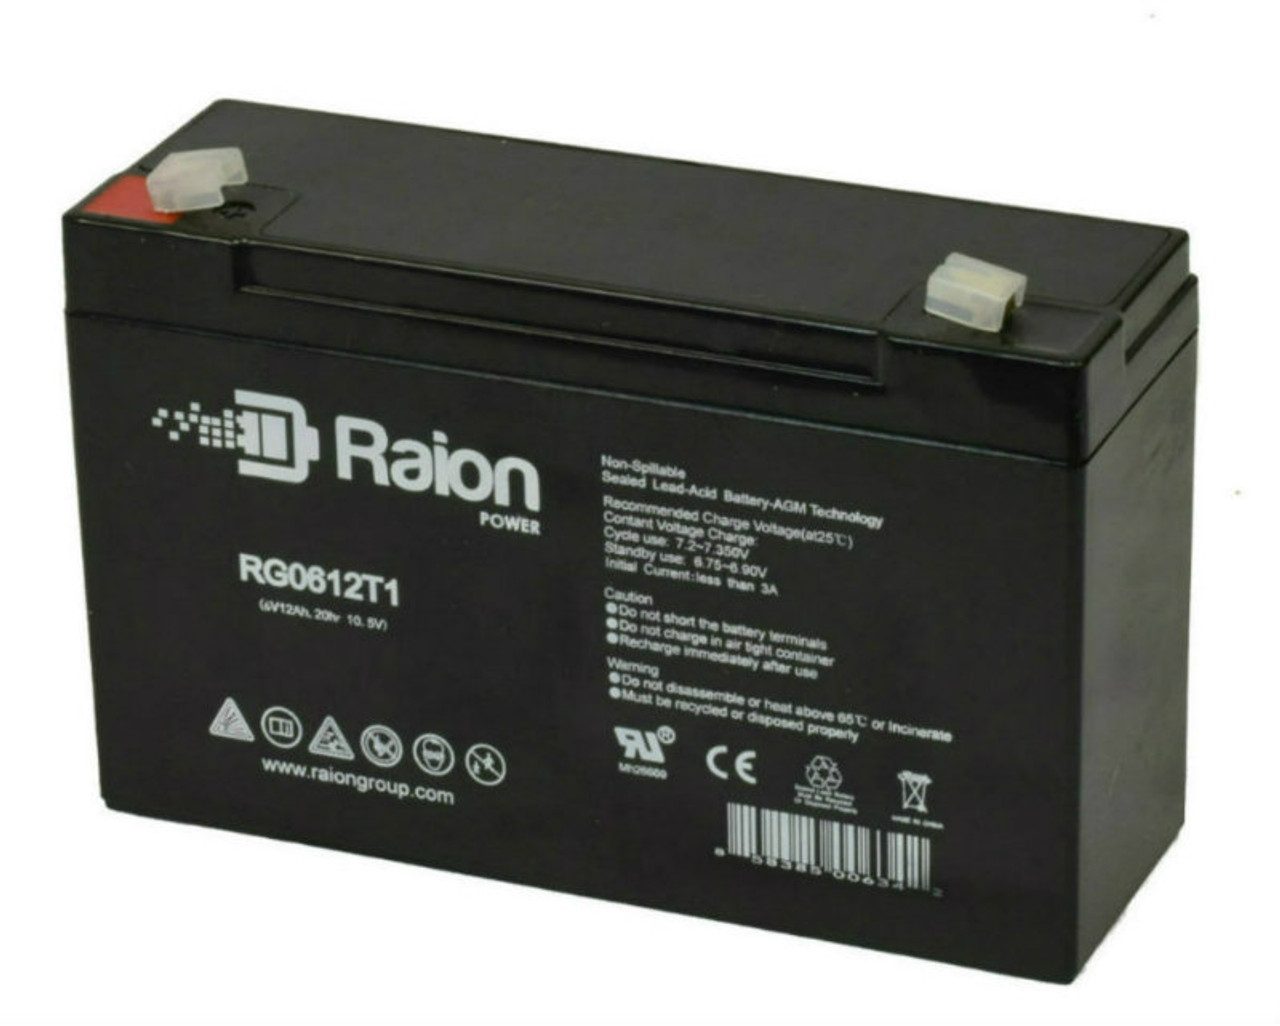 Raion Power RG06120T1 Replacement Battery for Gyneco 138 Thermal Cautery System Medical Equipment